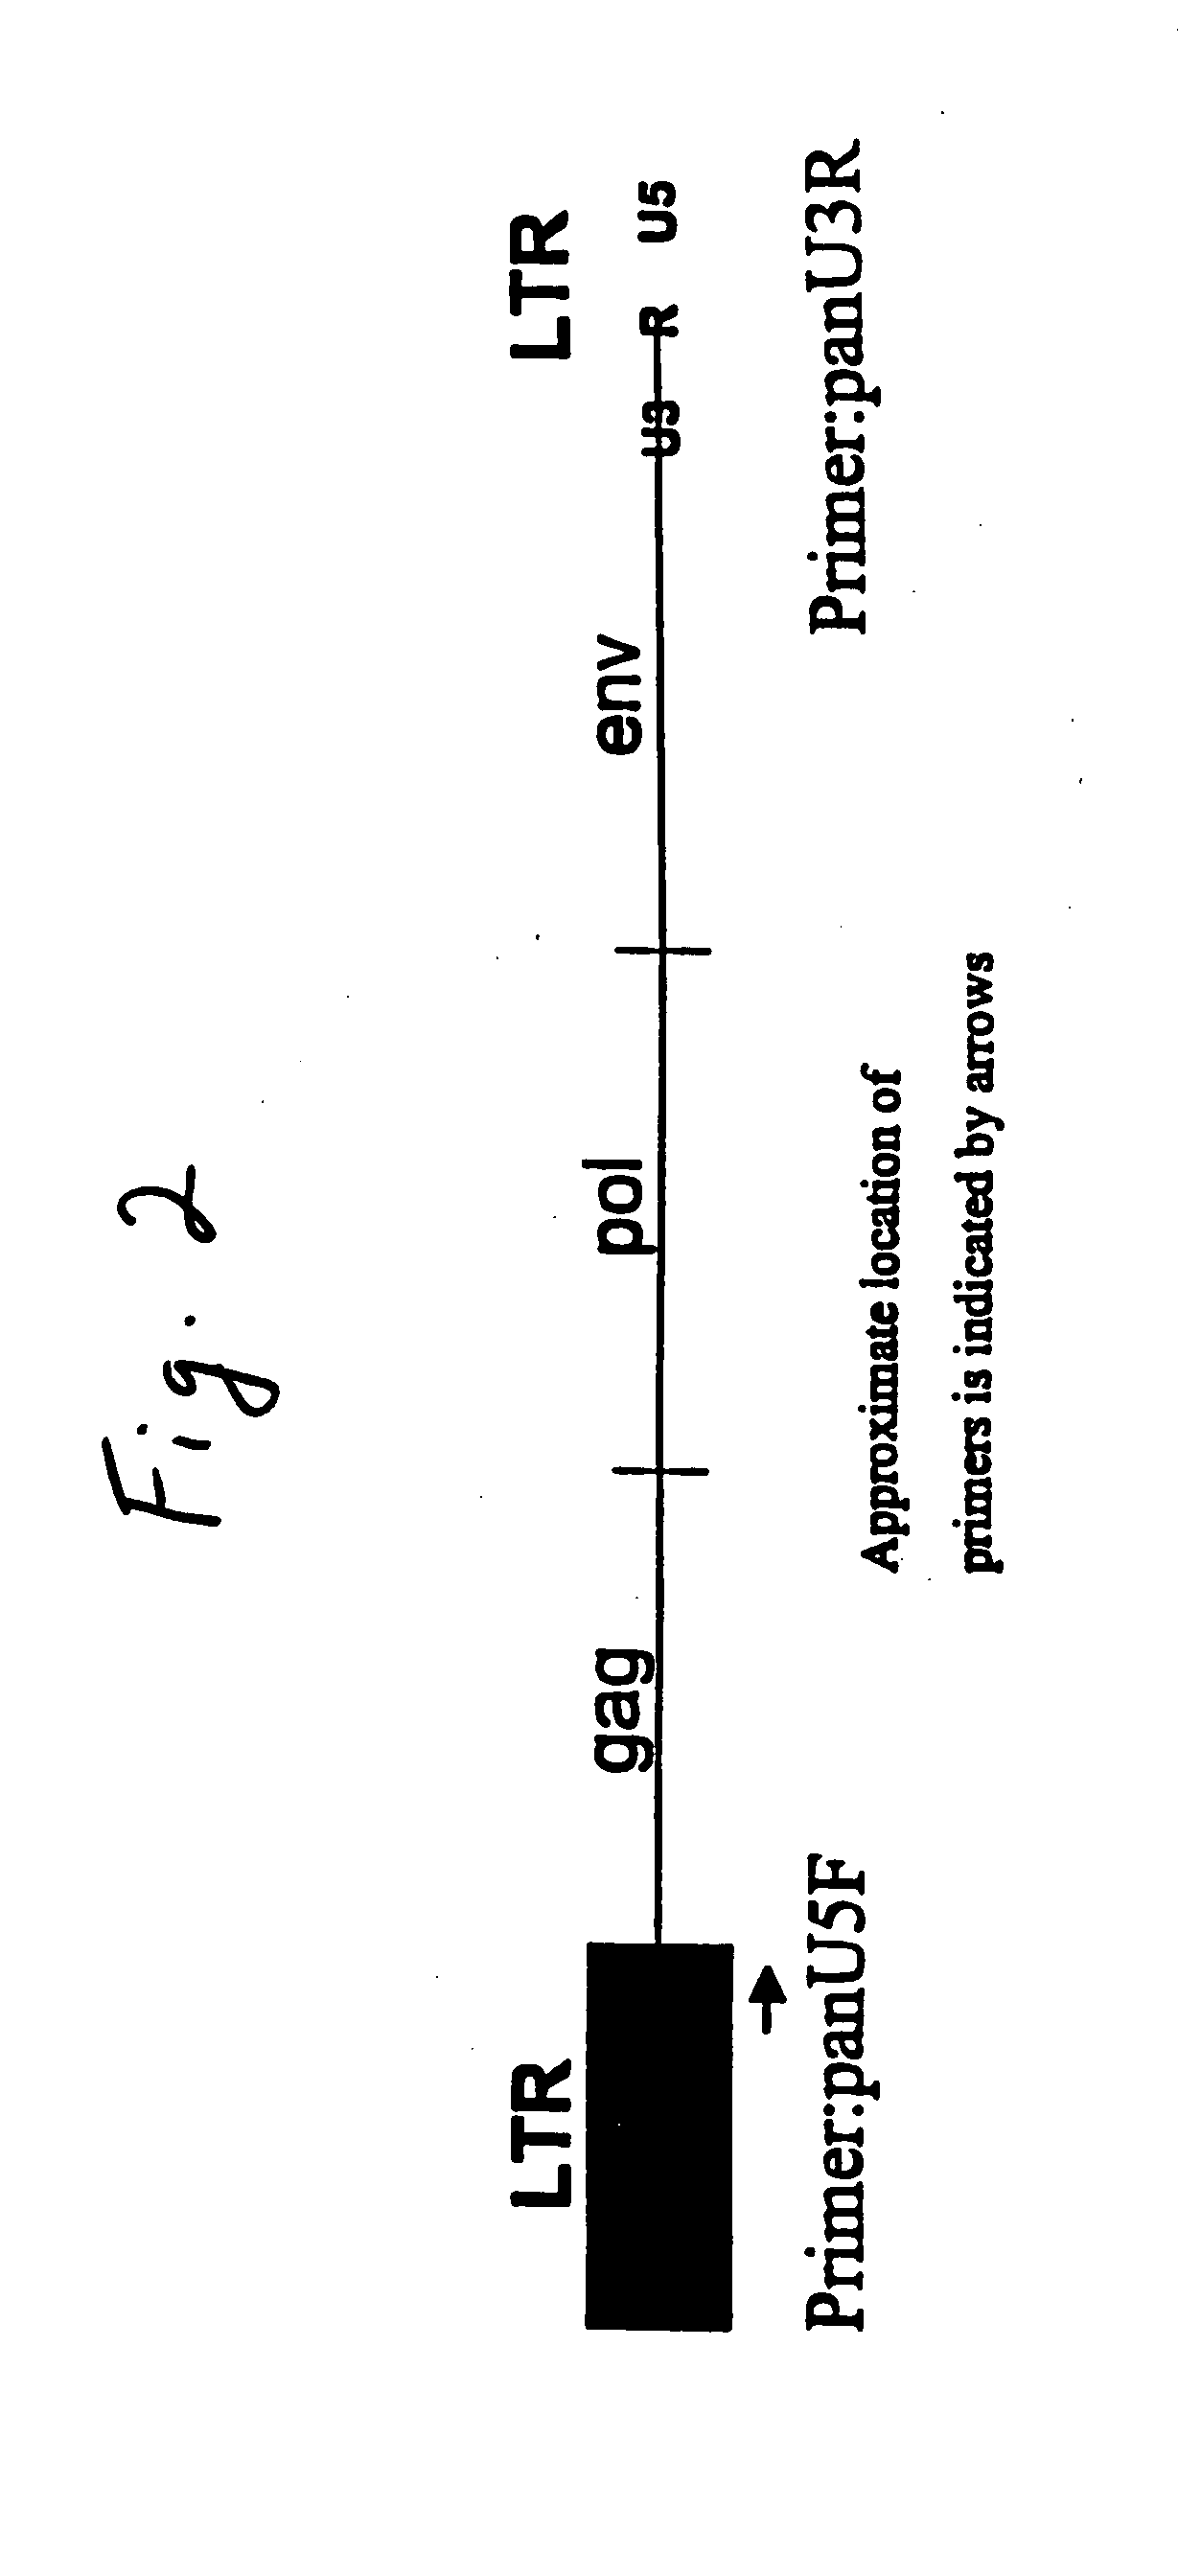 Swine defective for transmission of porcine endogenous retrovirus and uses thereof